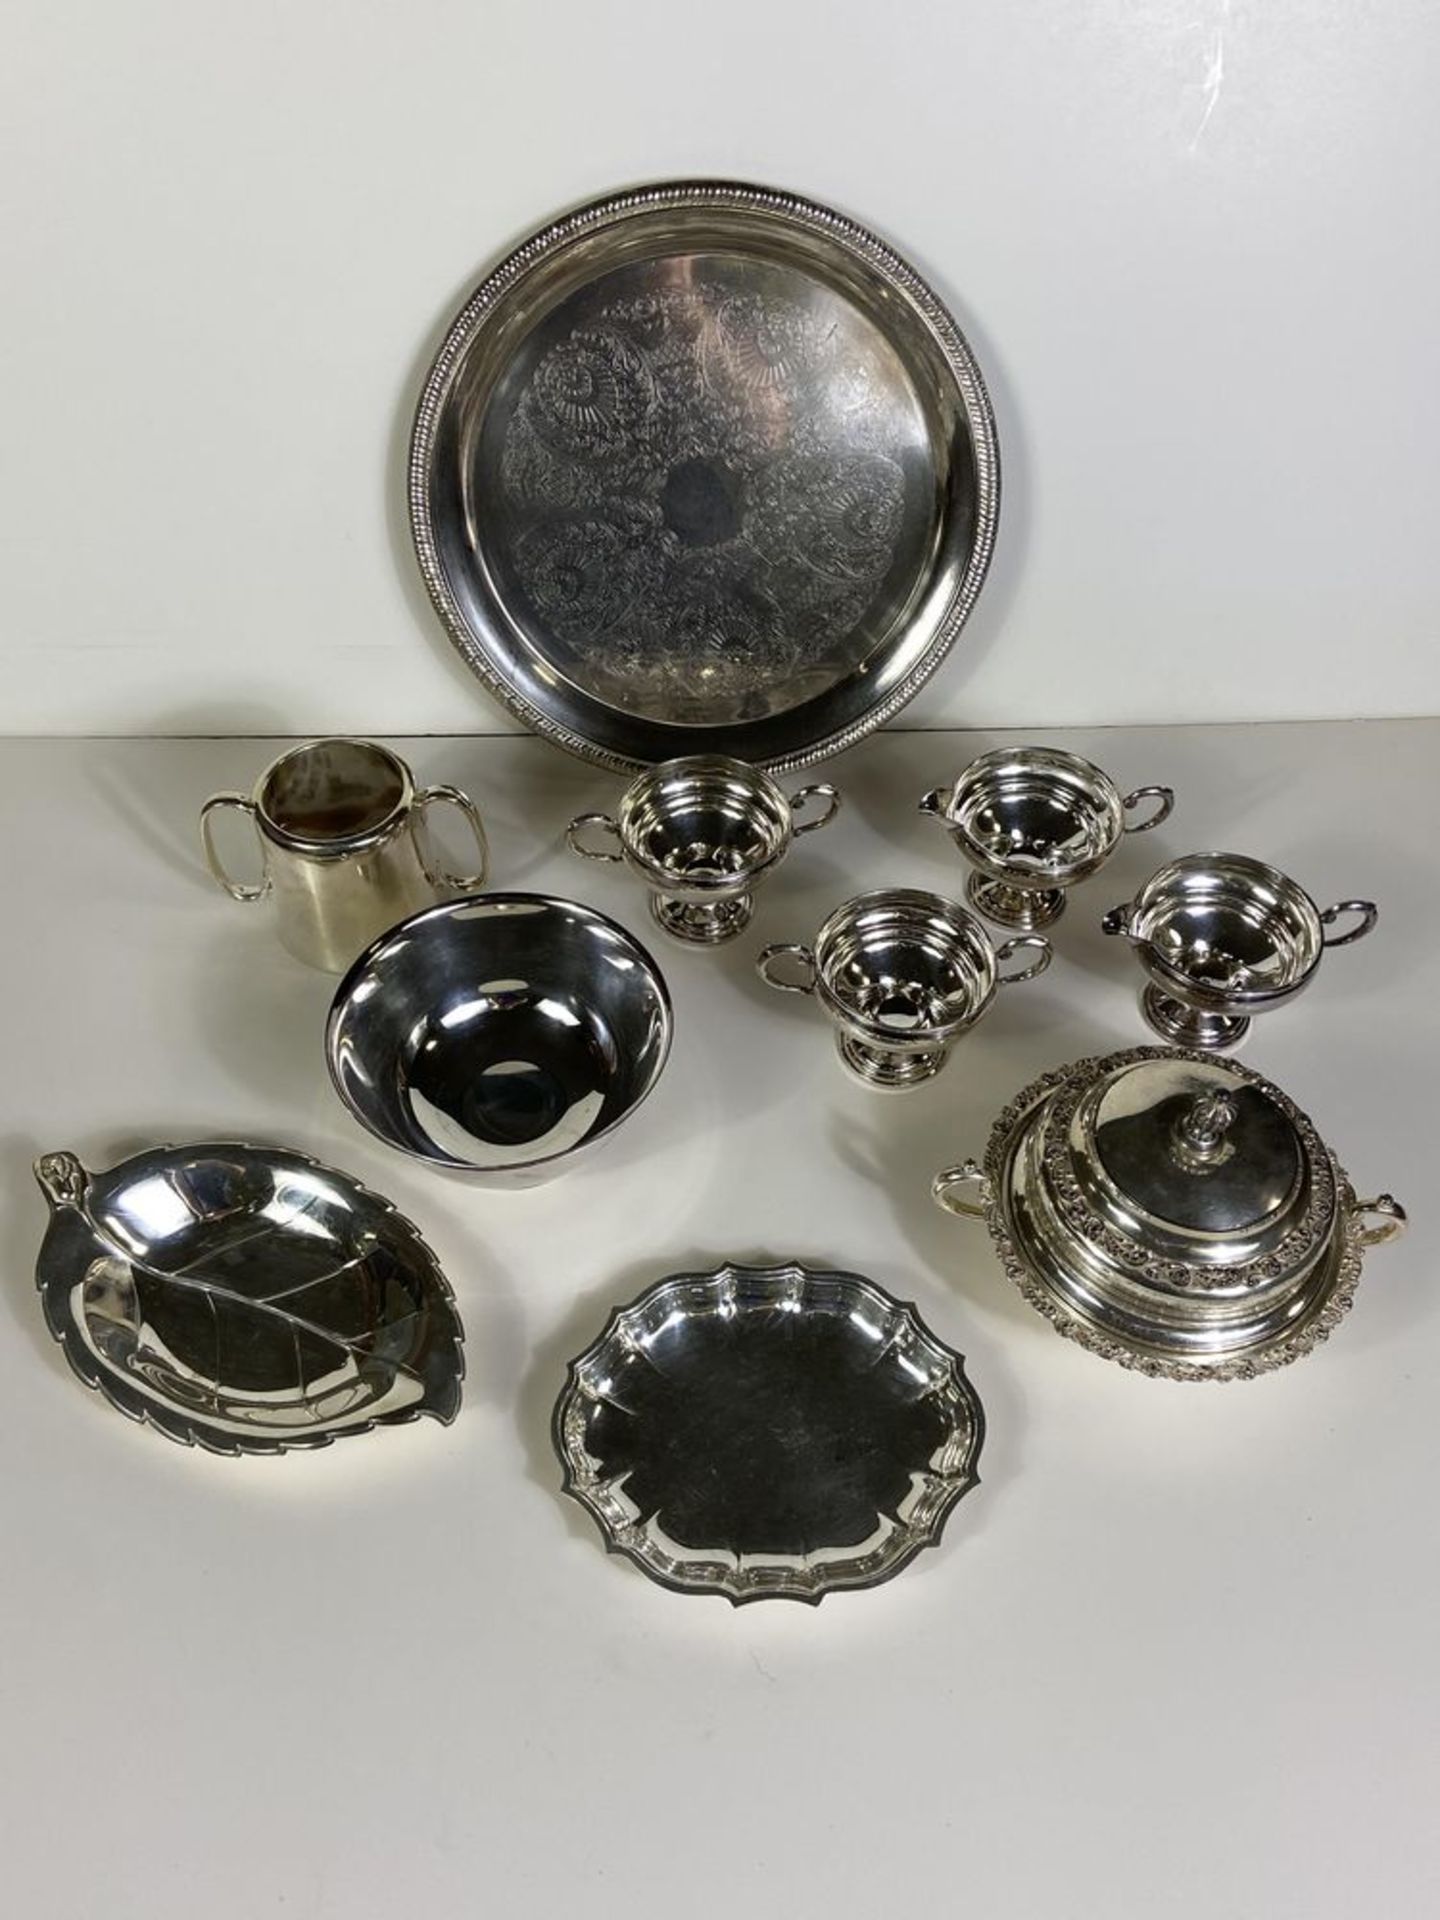 10 Silver Trays and Serveware, Chippendale Silver Company, Meriden Company, Crown Sterling Weighted,